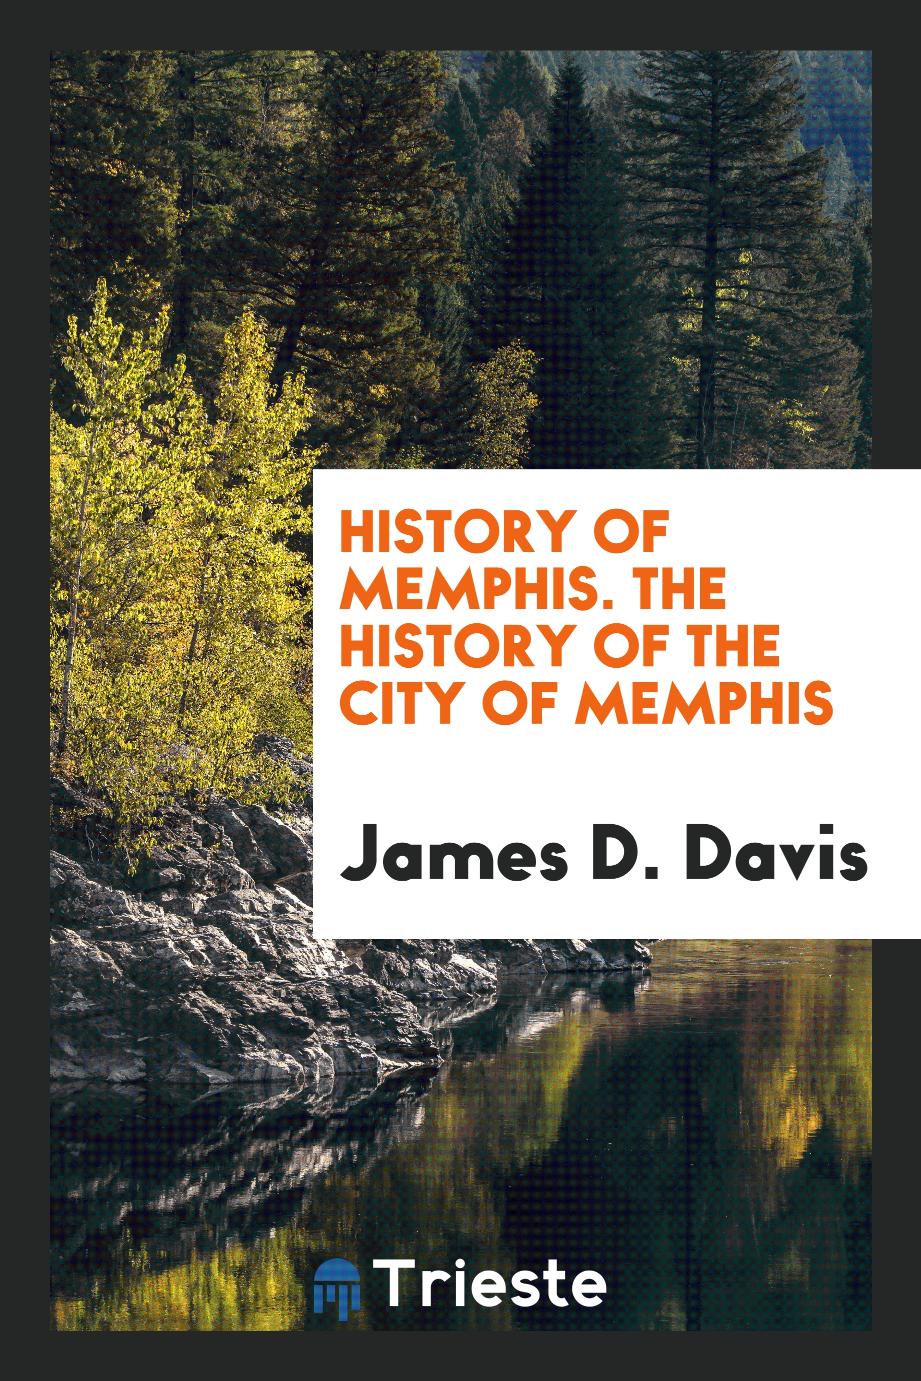 History of Memphis. The History of the City of Memphis